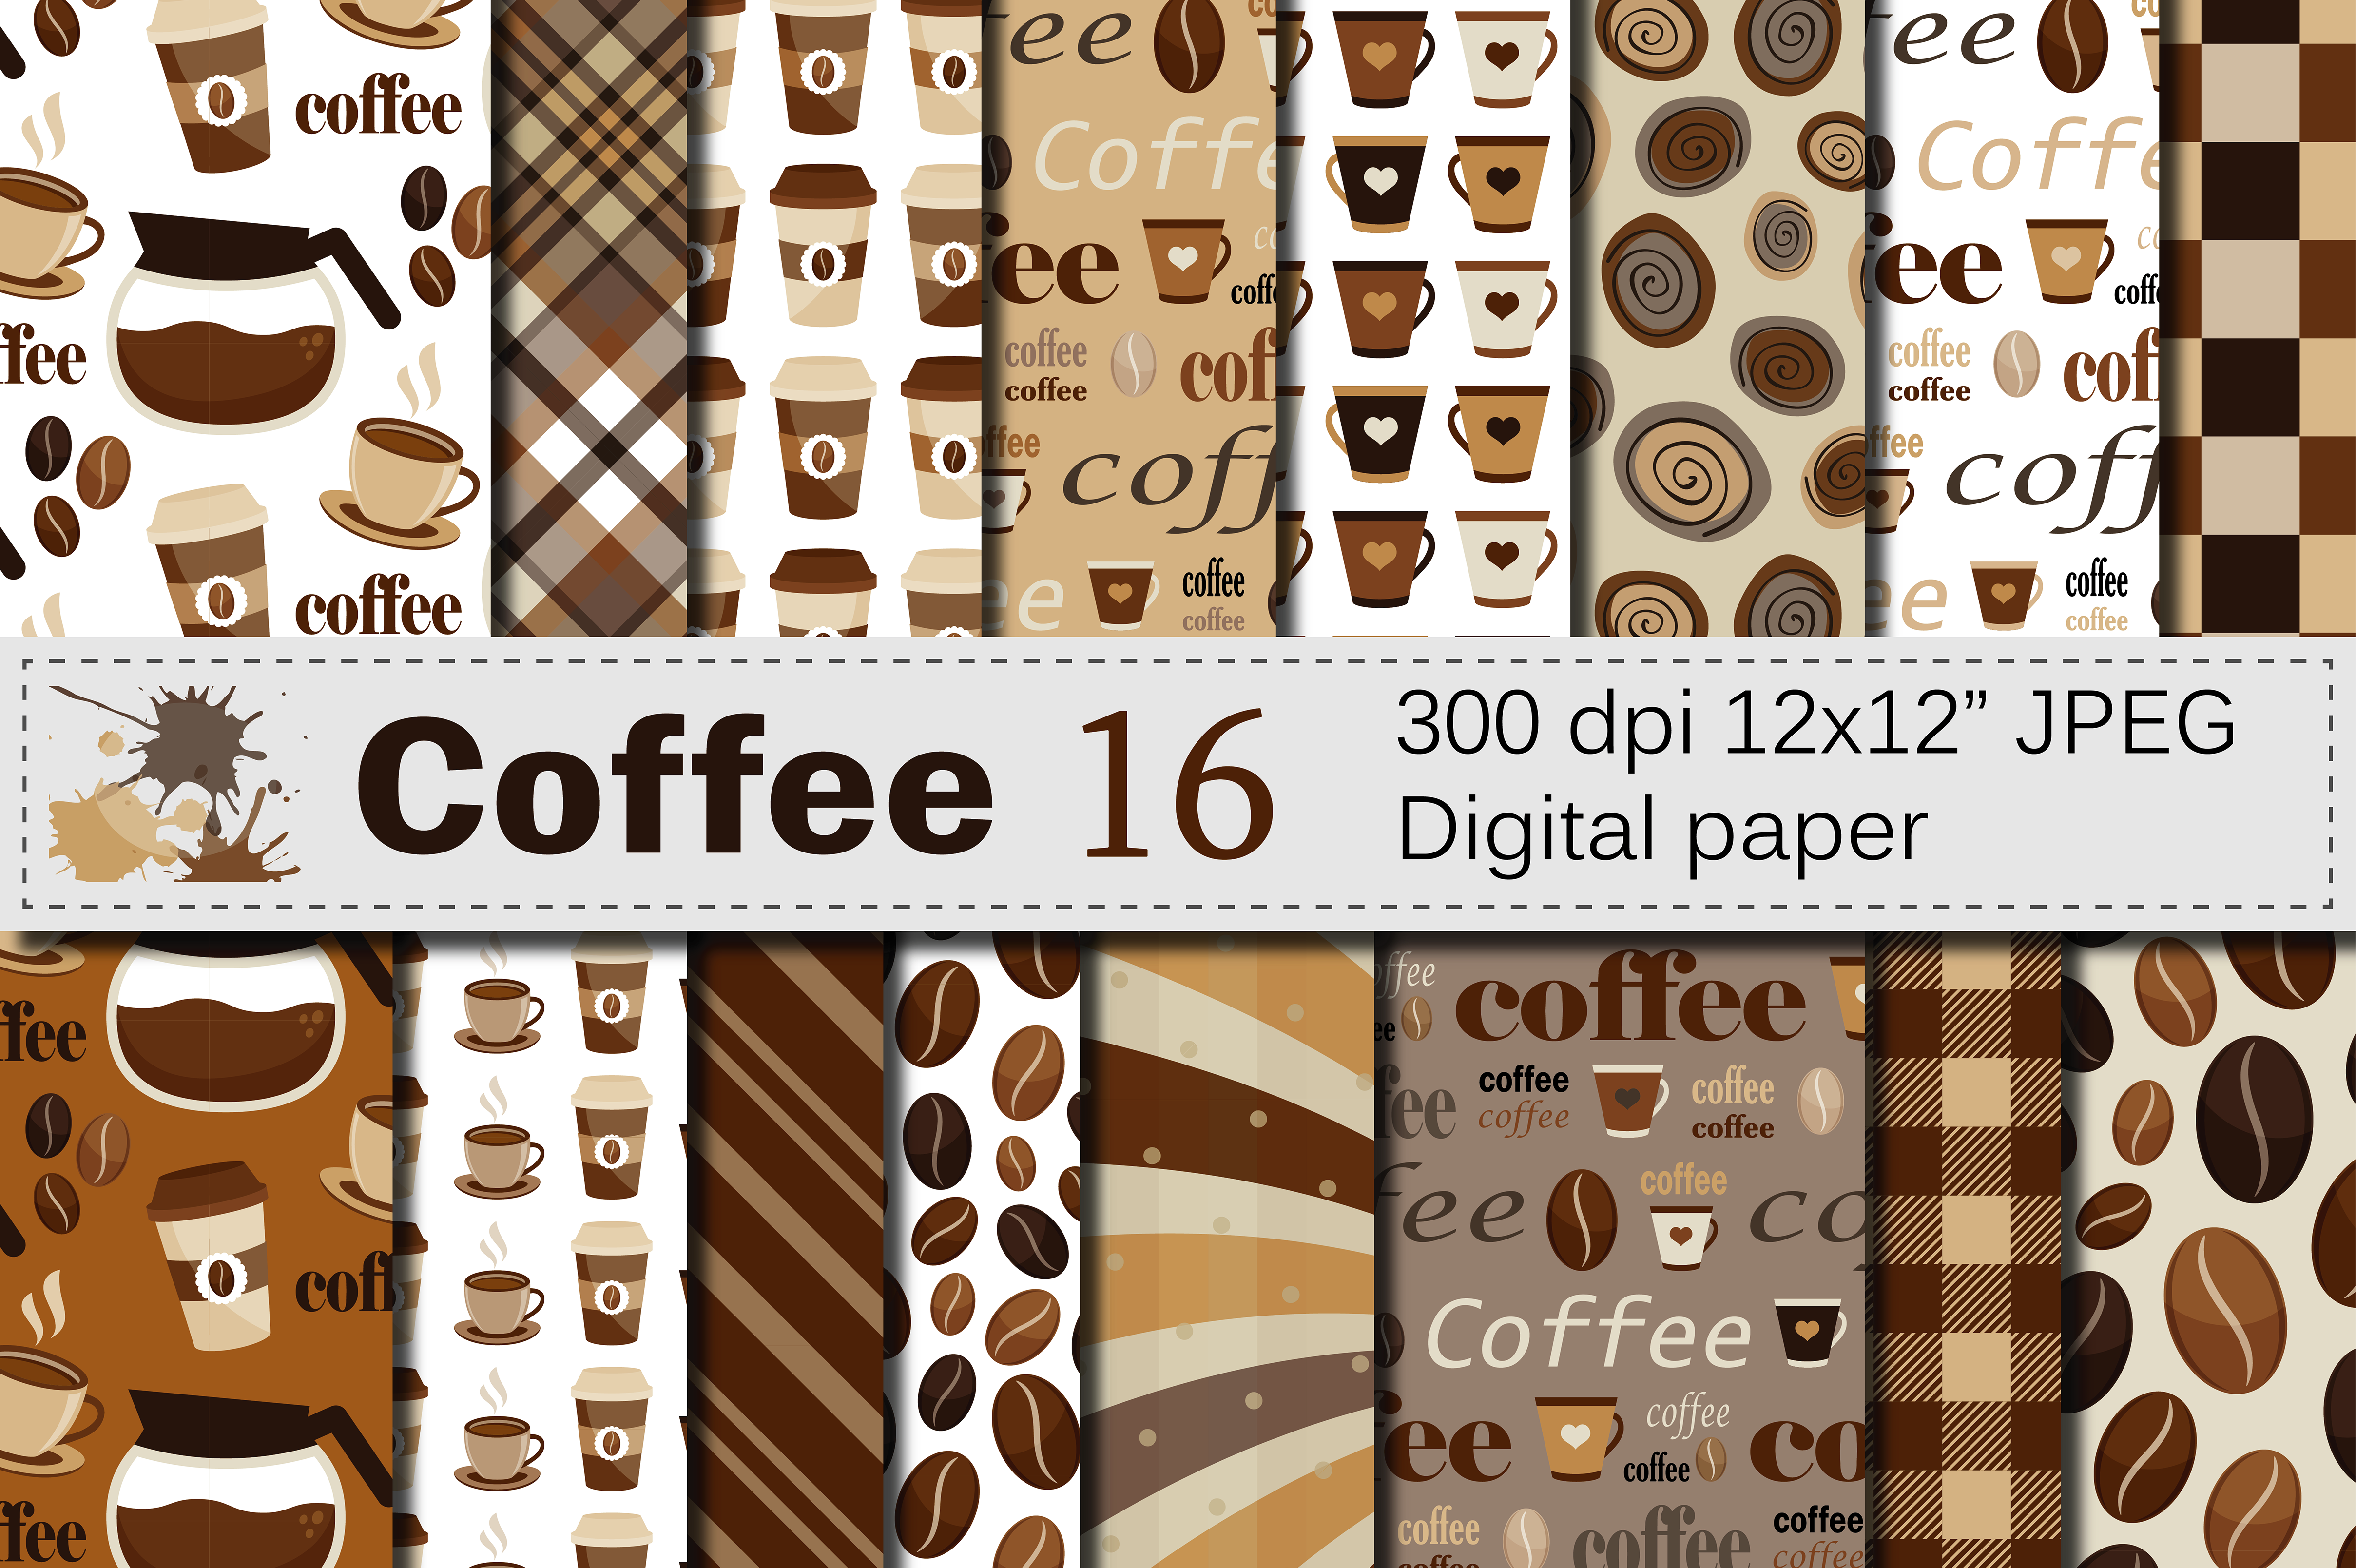 Coffee Digital Paper Pack / Coffee Beans Background / Brown Scrapbooking Paper Graphic Backgrounds By VR Digital Design 1